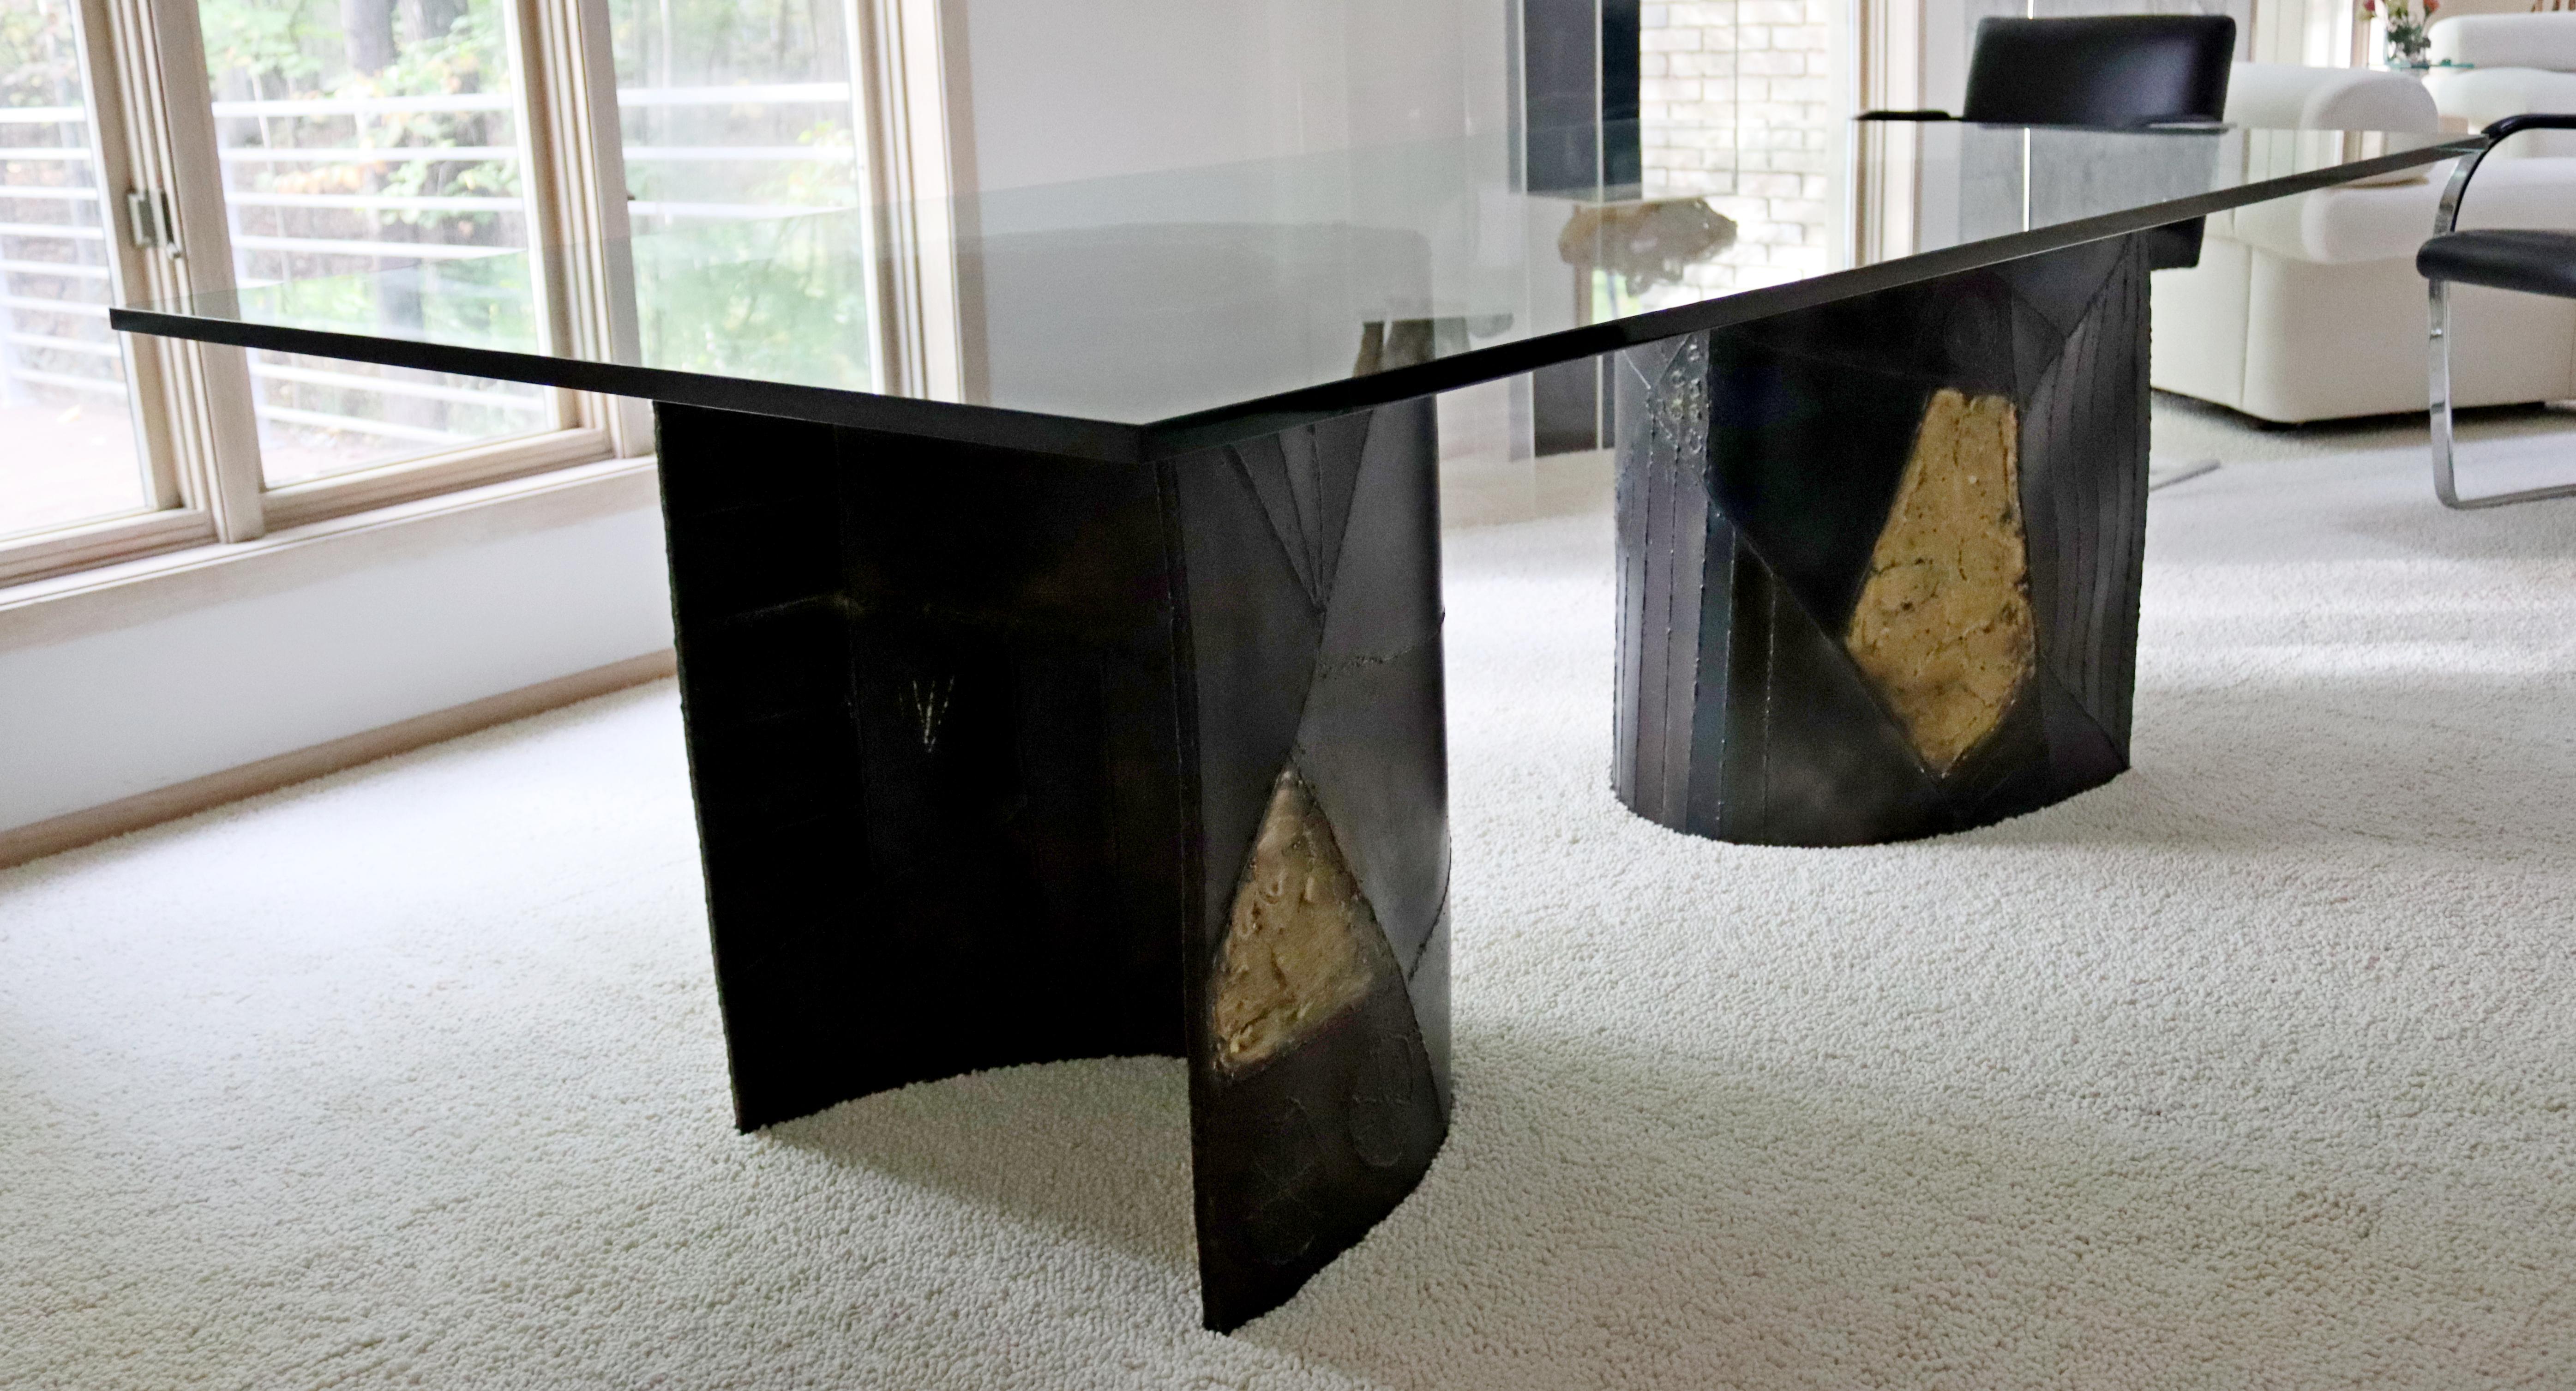 For your consideration is a stupendous and iconic, glass topped dining table, on sculpturally welded steel and bronze bases, by Paul evans for Directional, circa the 1970s. In excellent vintage condition. The dimensions are 84